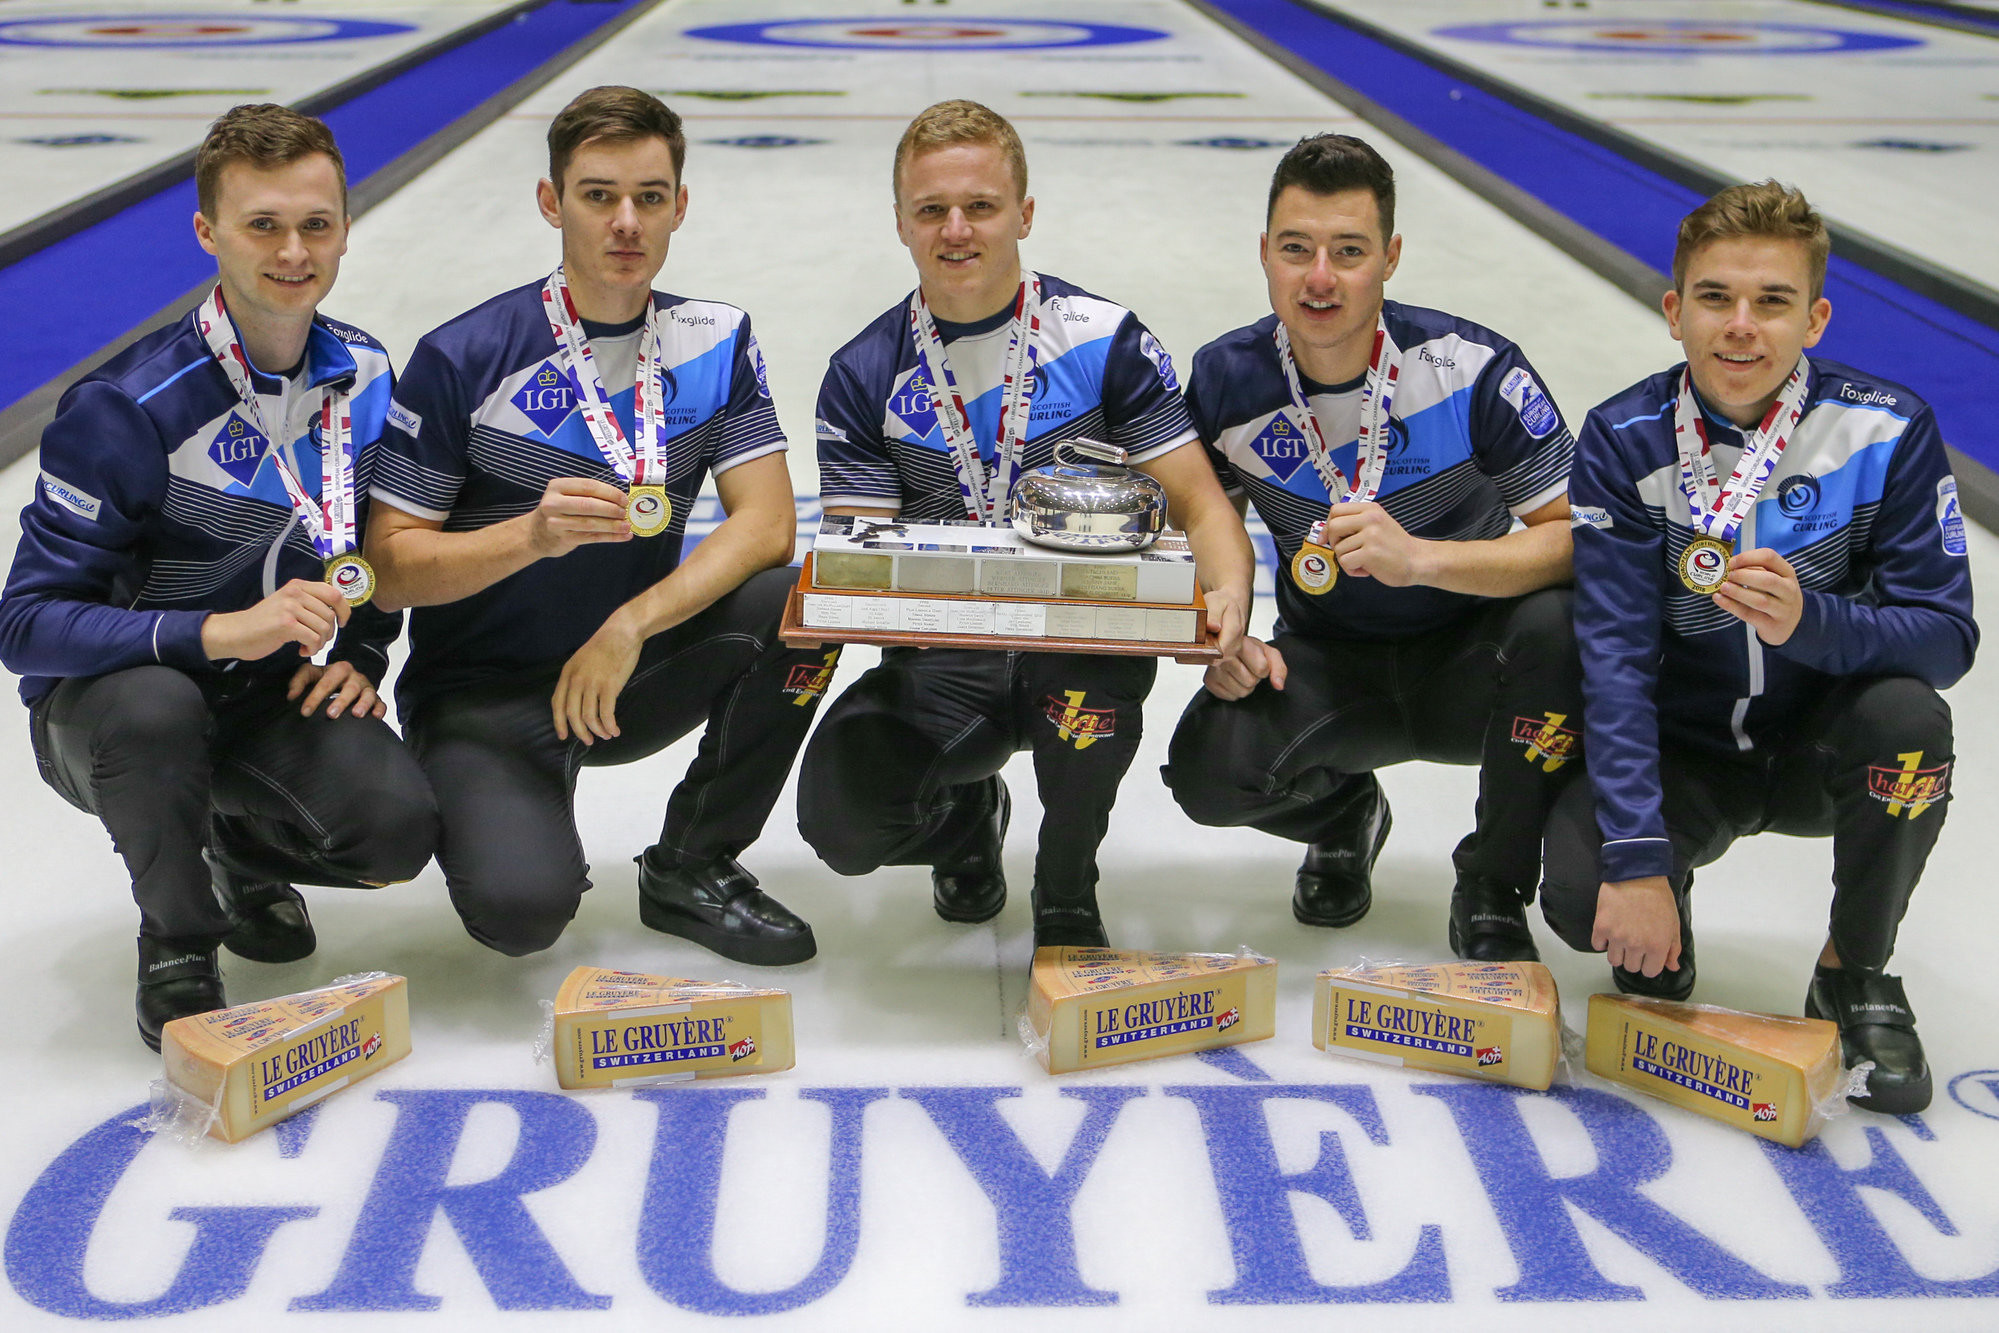 Scotland's men denied Sweden a double victory at the European Curling Championship by winning a see-saw match to lift their first title for 10 years ©WCF 